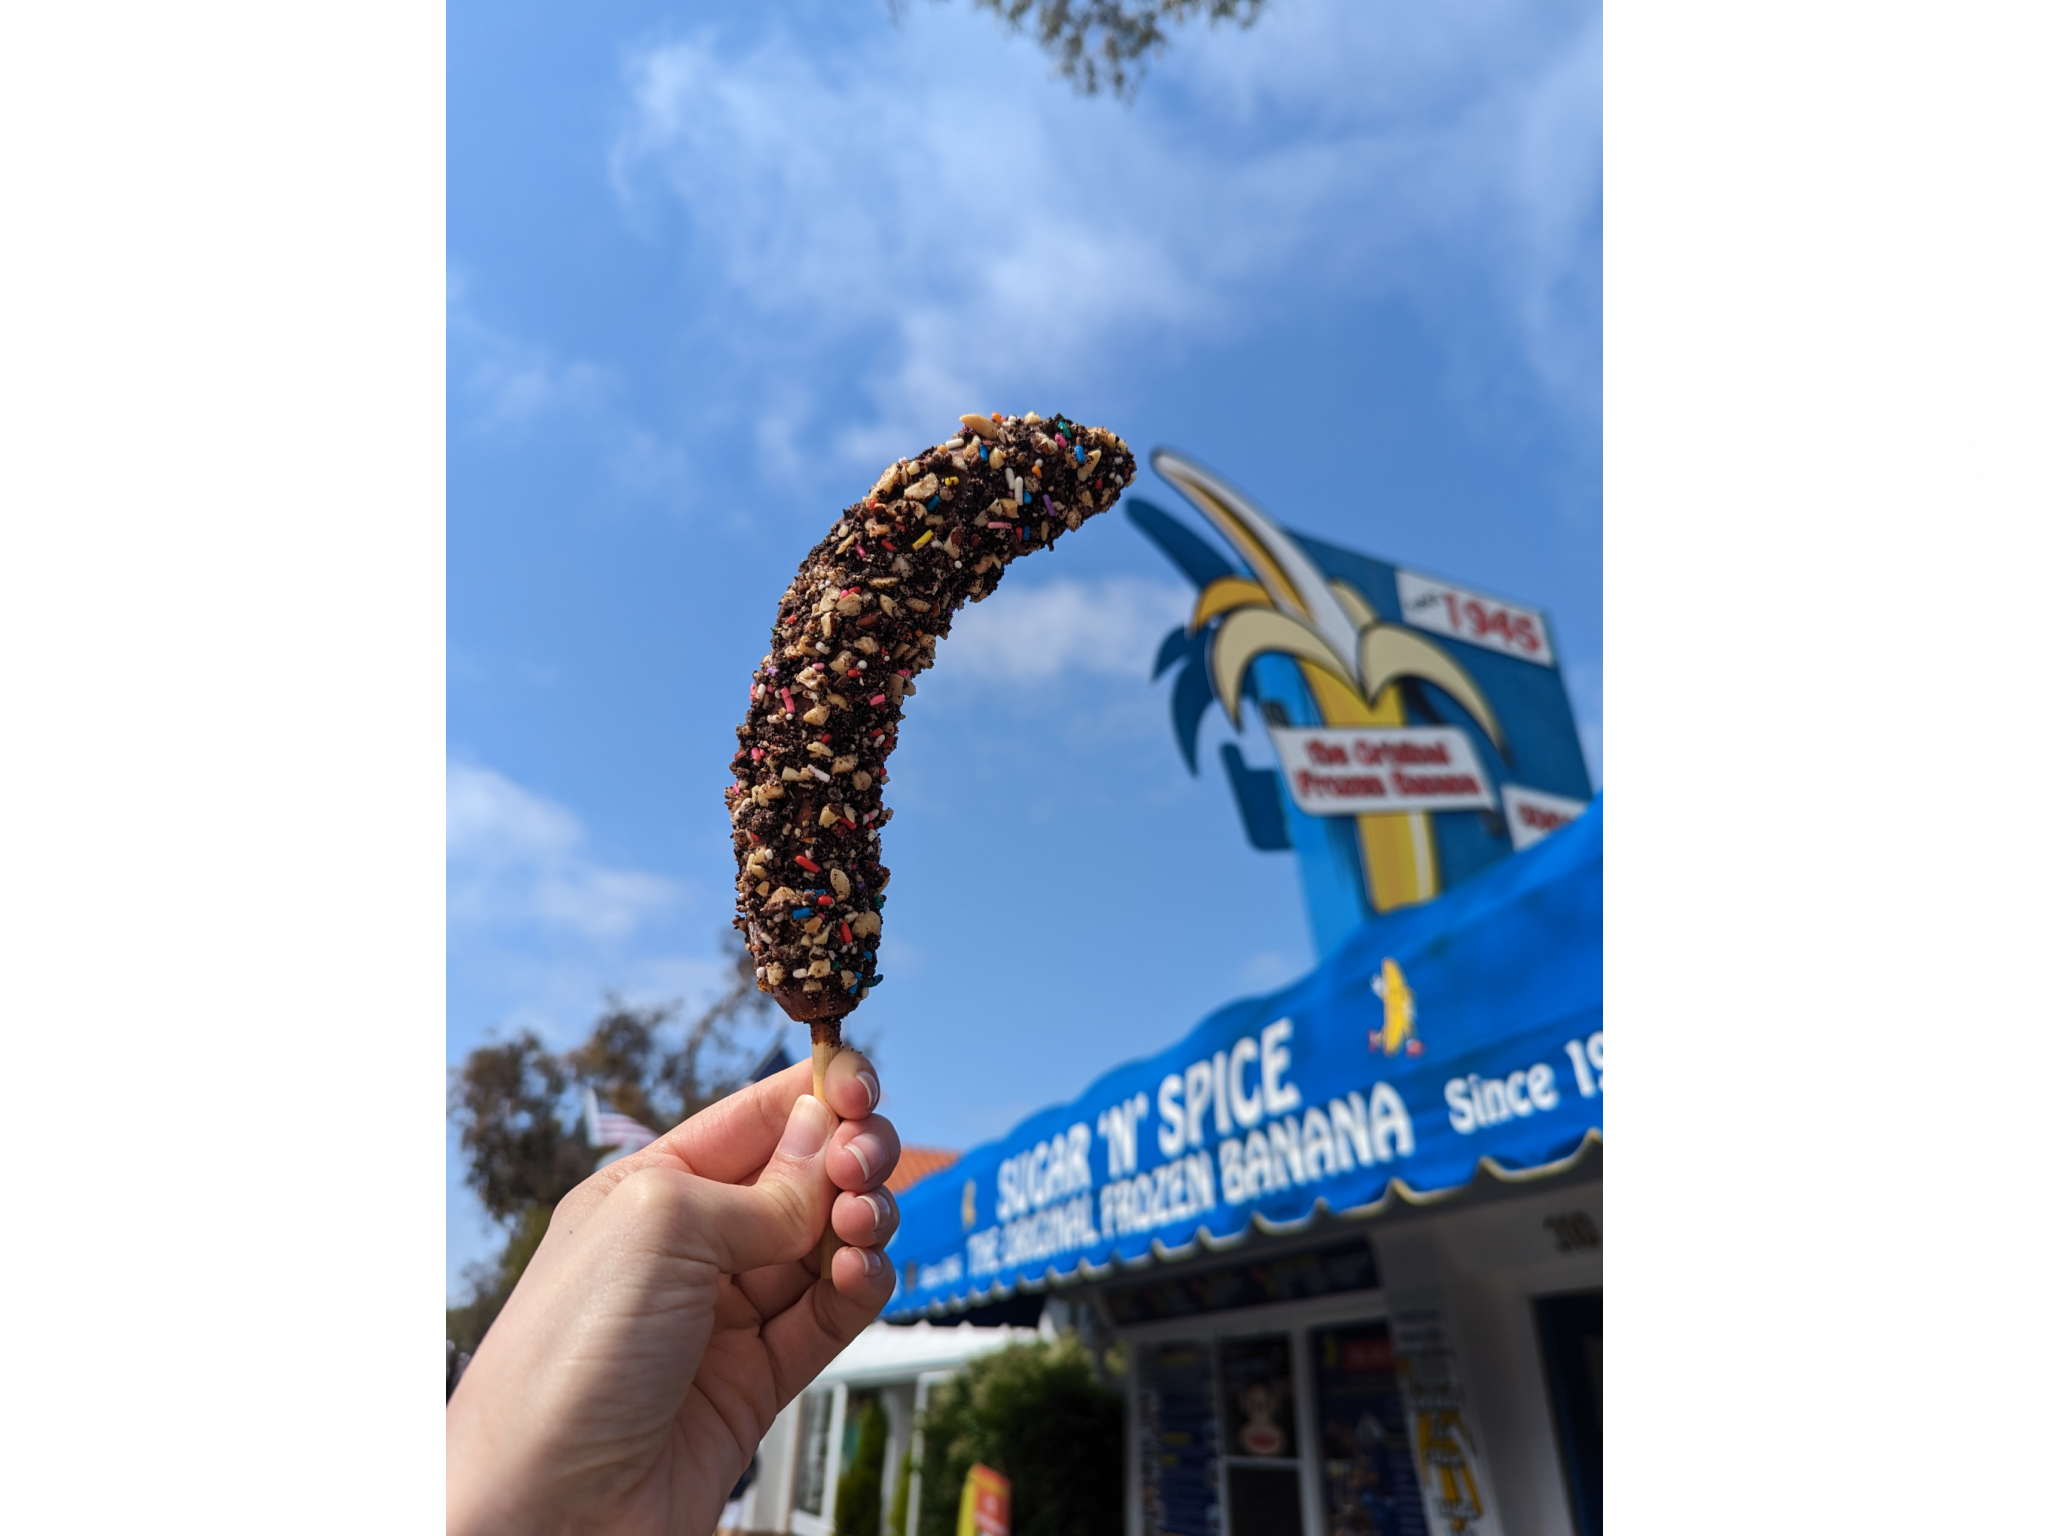 Frozen bananas dipped in chocolate are a must-try when visiting Newport Beach